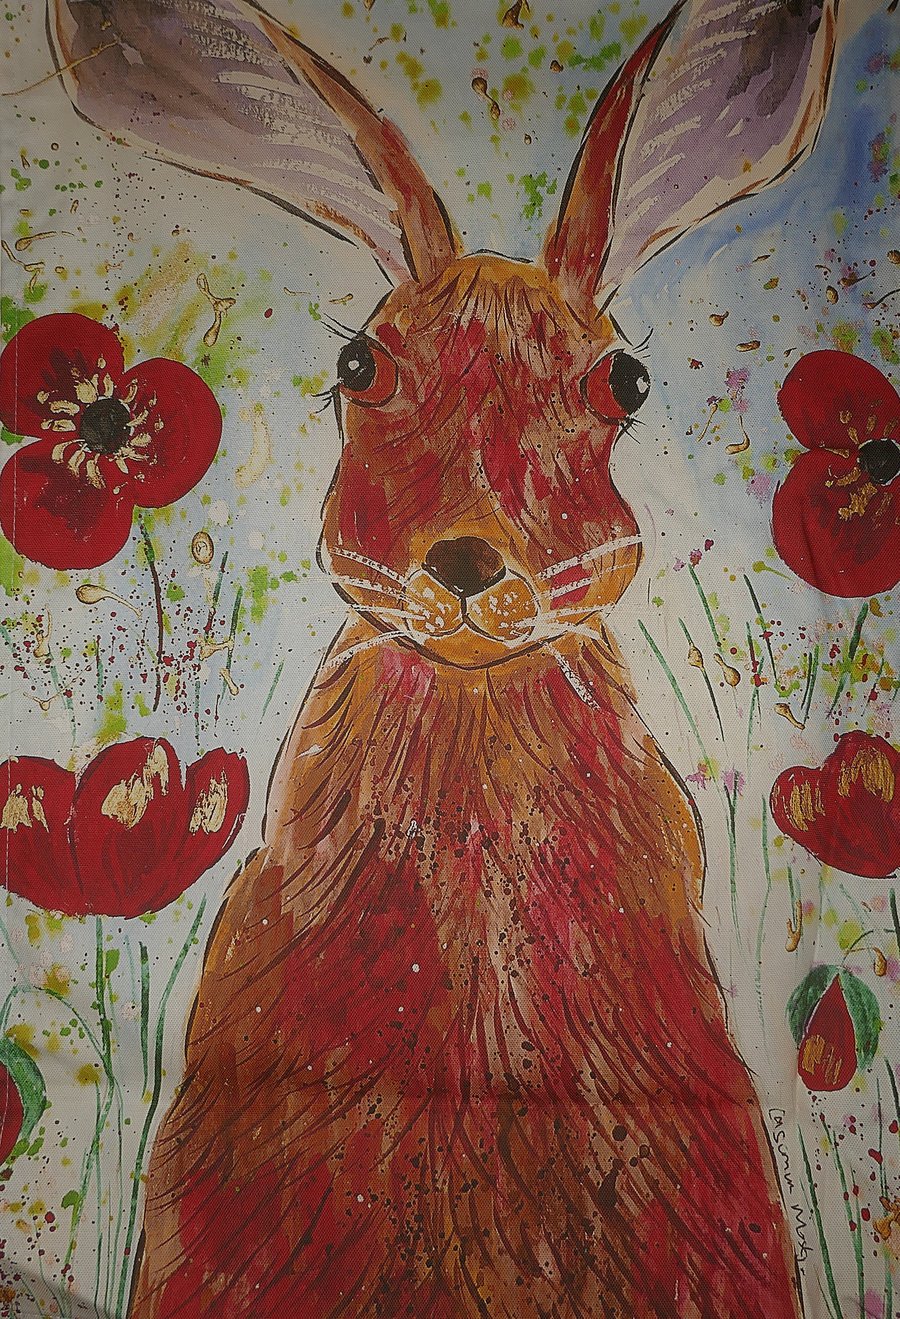  Colourful Hare and Poppies Tea towel 